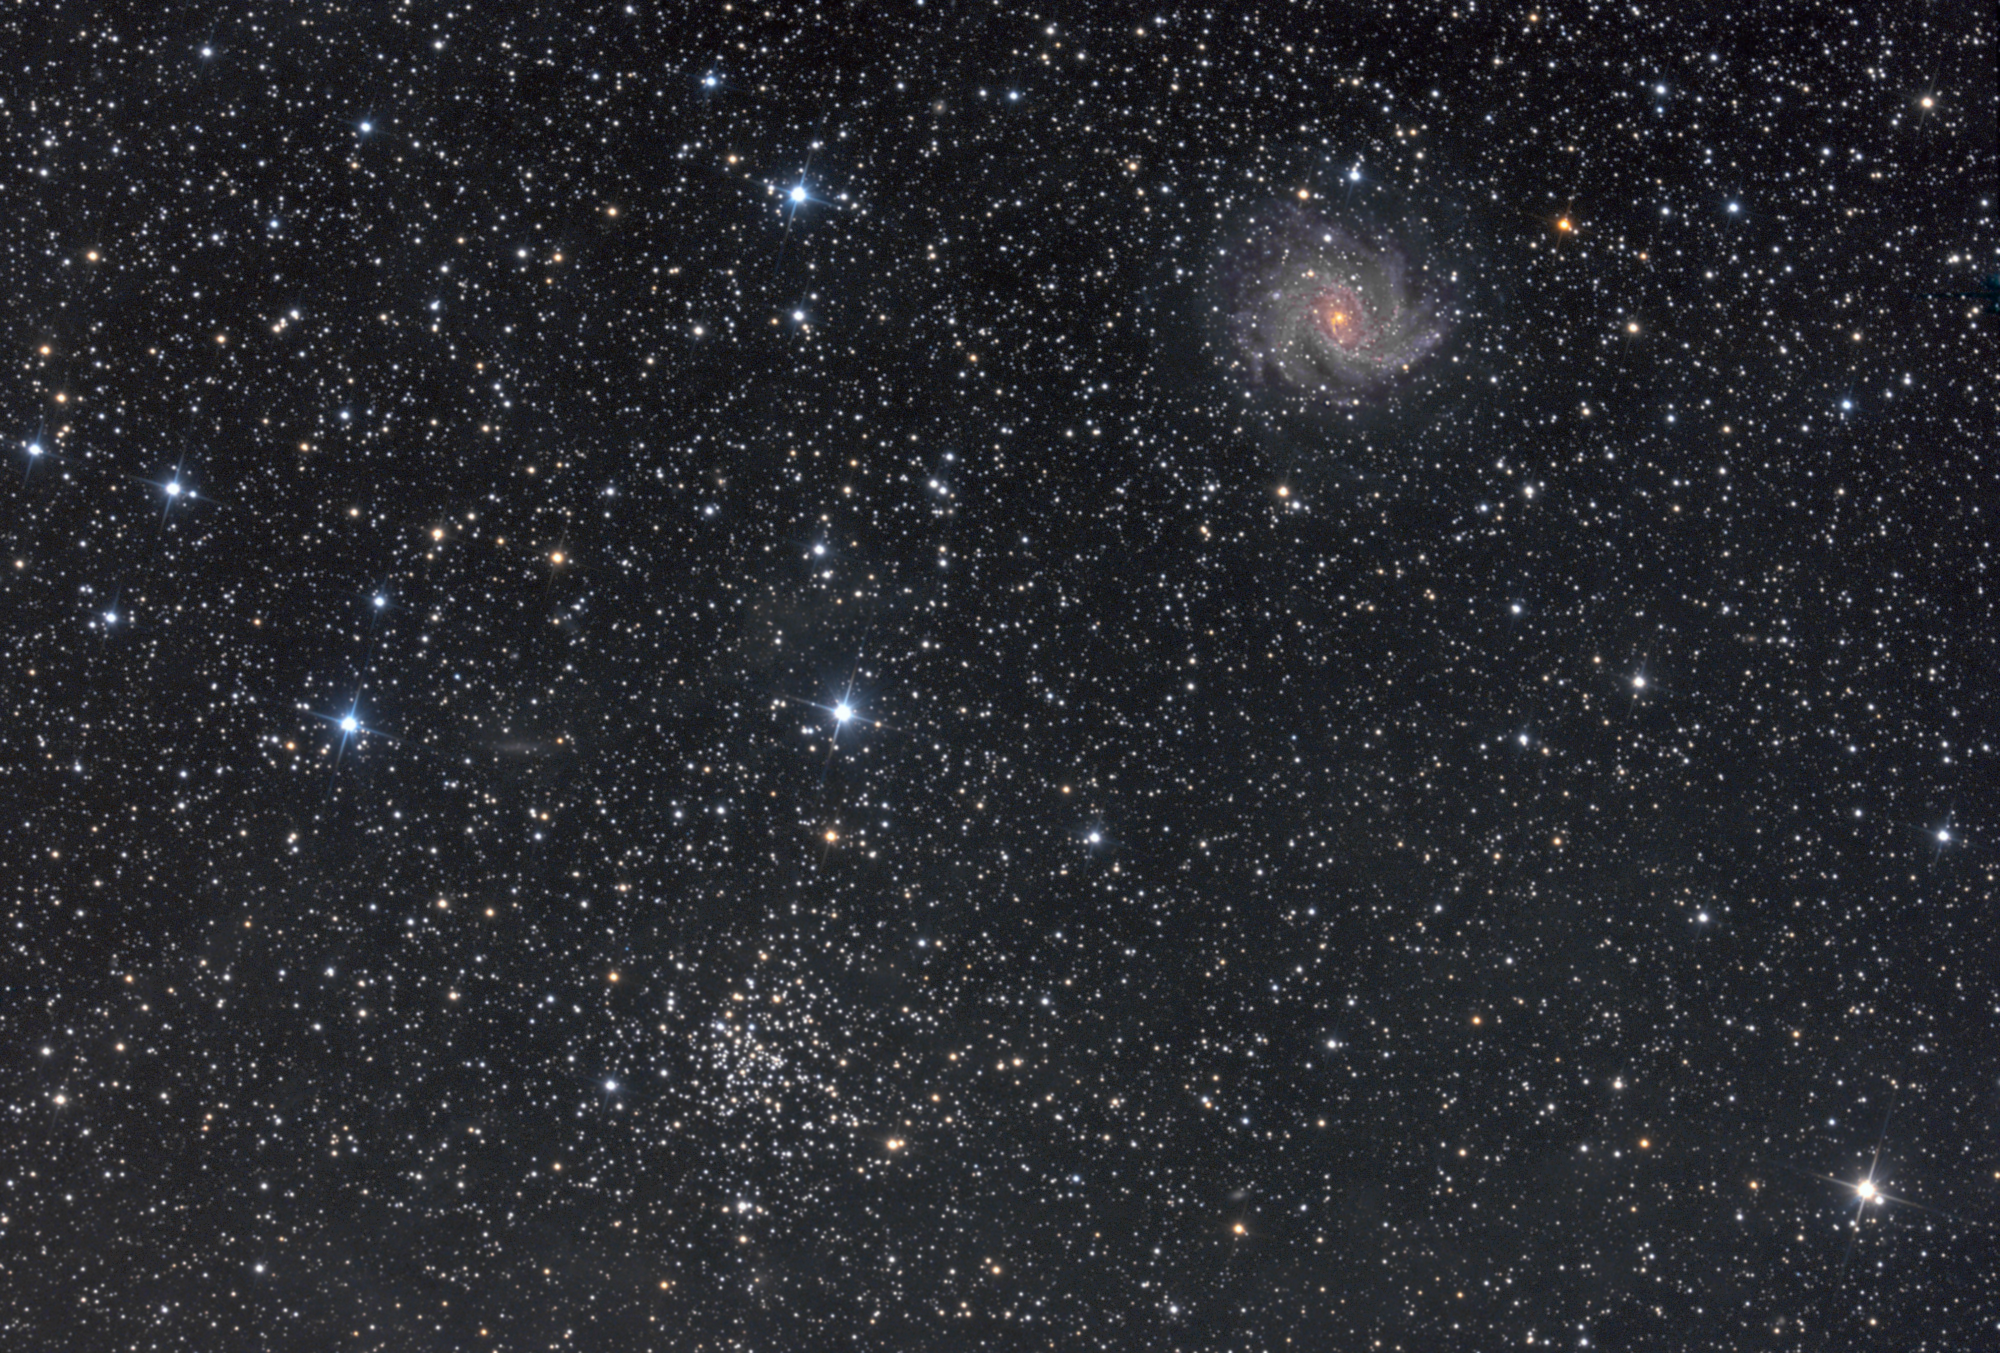 r_proc_NGC6946_stacked_39poses_miror_crop_photom_gimp_trait3.thumb.jpg.6f471ac80fd3ef9f8cb81e628cc2d2bdpsp3.png.967ab7f769cc3e954d29ffbe267c9a61.png